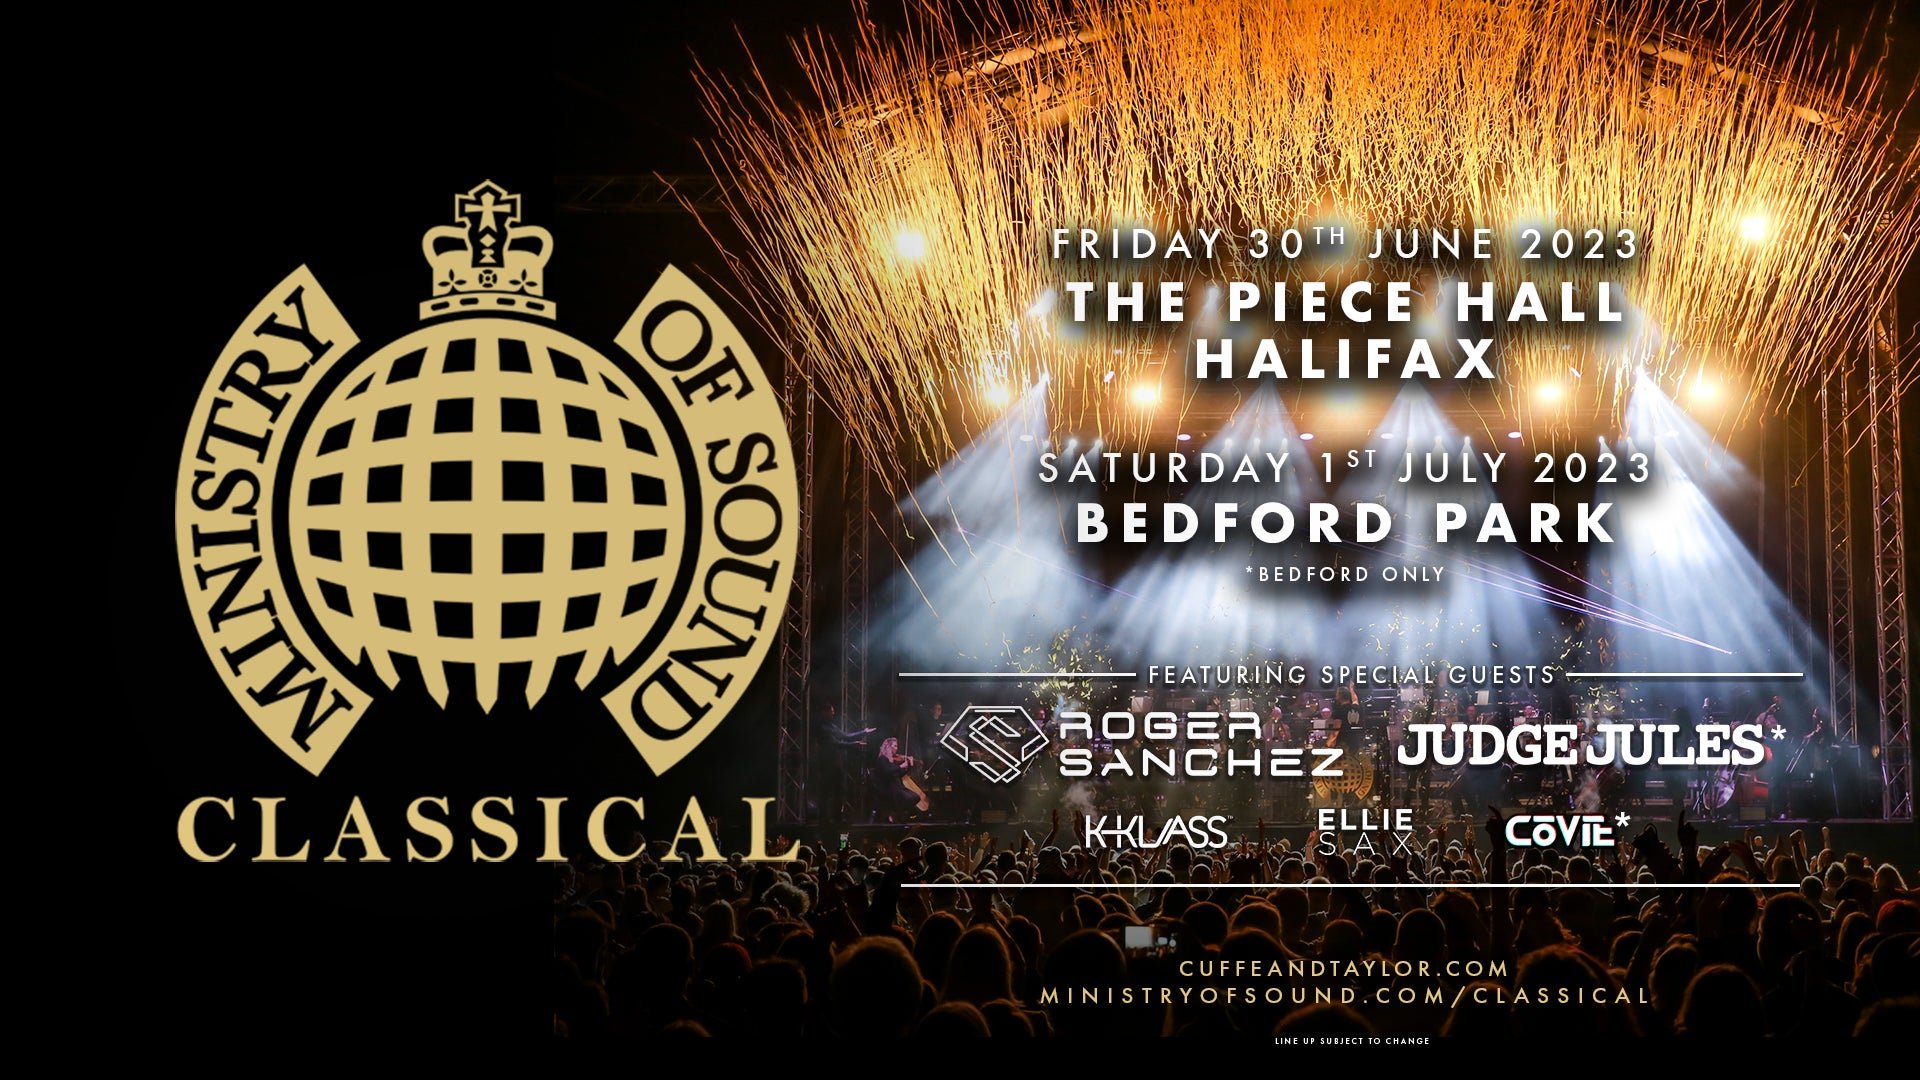 Image name Ministry of Sound Classical at The Piece Hall the 29 image from the post Ministry of Sound Classical at The Piece Hall, Halifax in Yorkshire.com.